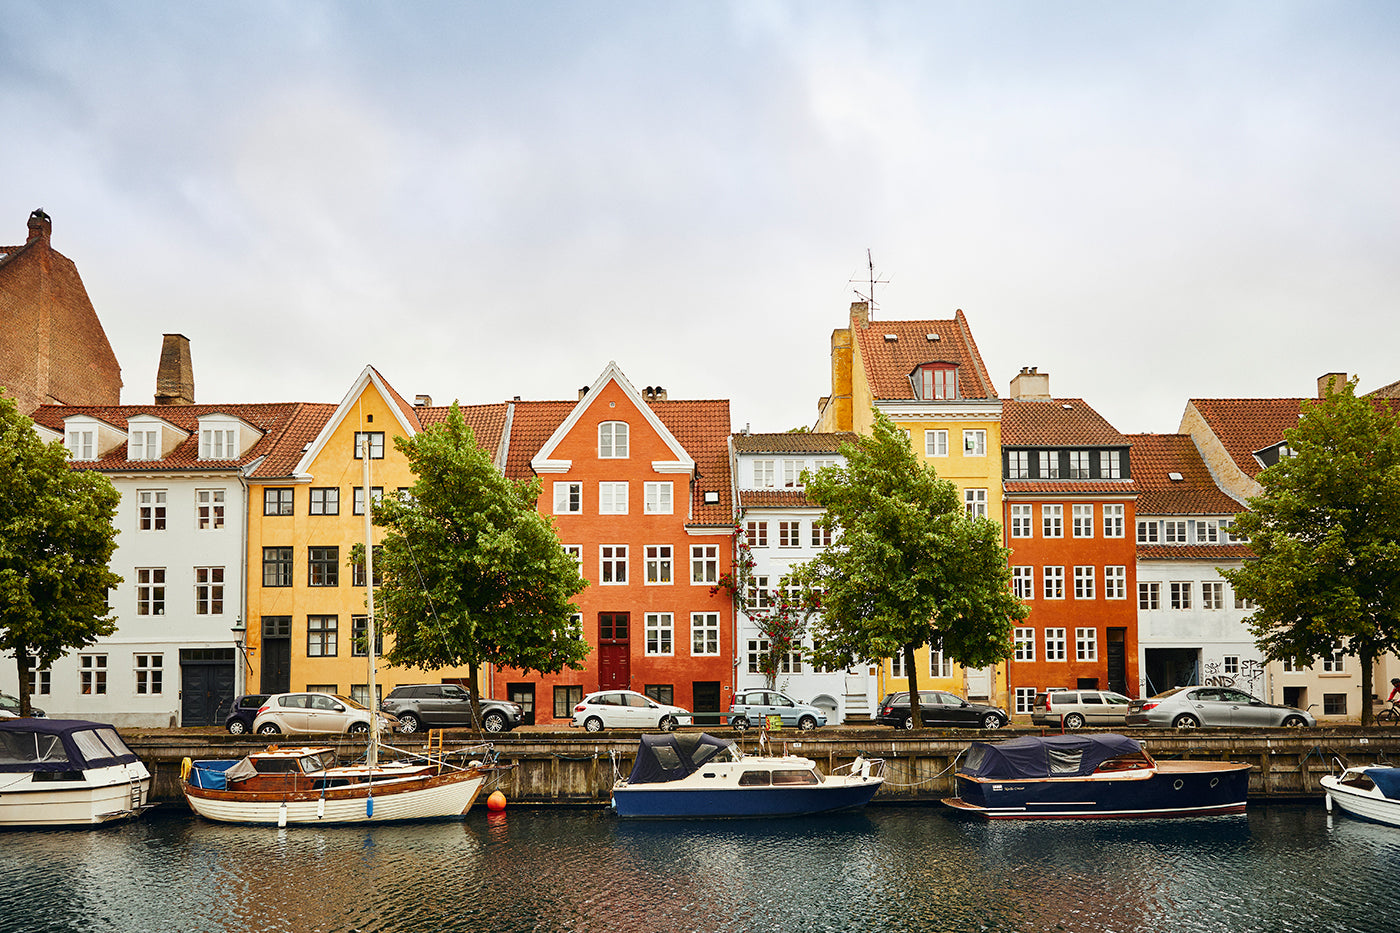 On the Go in Copenhagen: A Father-Son Duo Explore Their Hometown